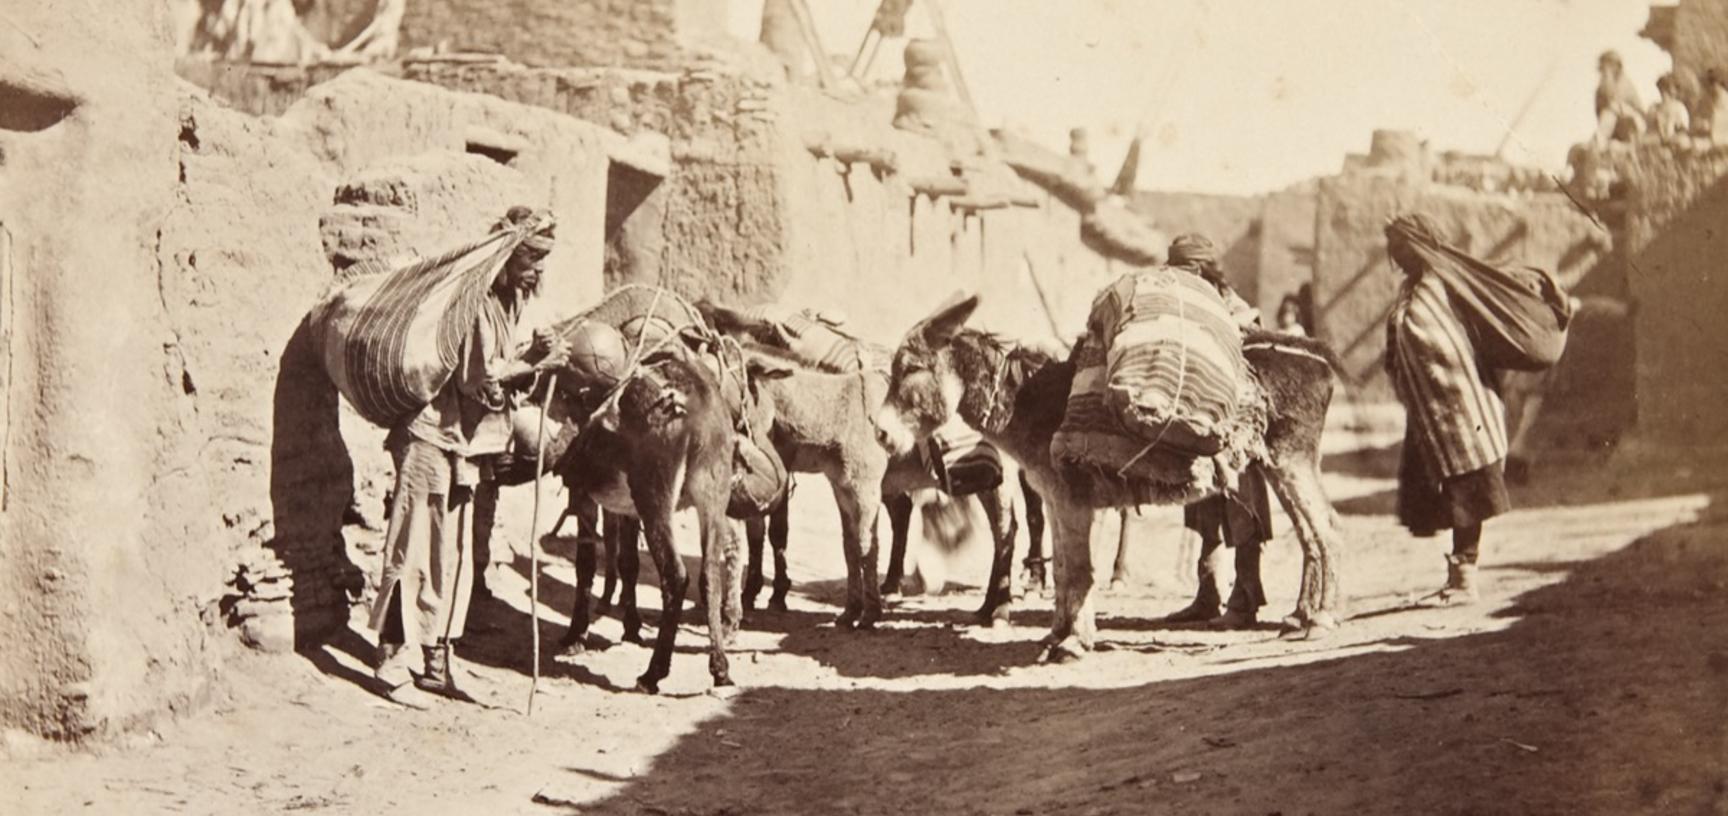 Zuni people with pack animals. Of this photograph James Stevenson noted that both men and women ‘carry almost as large and heavy loads as the donkey'.